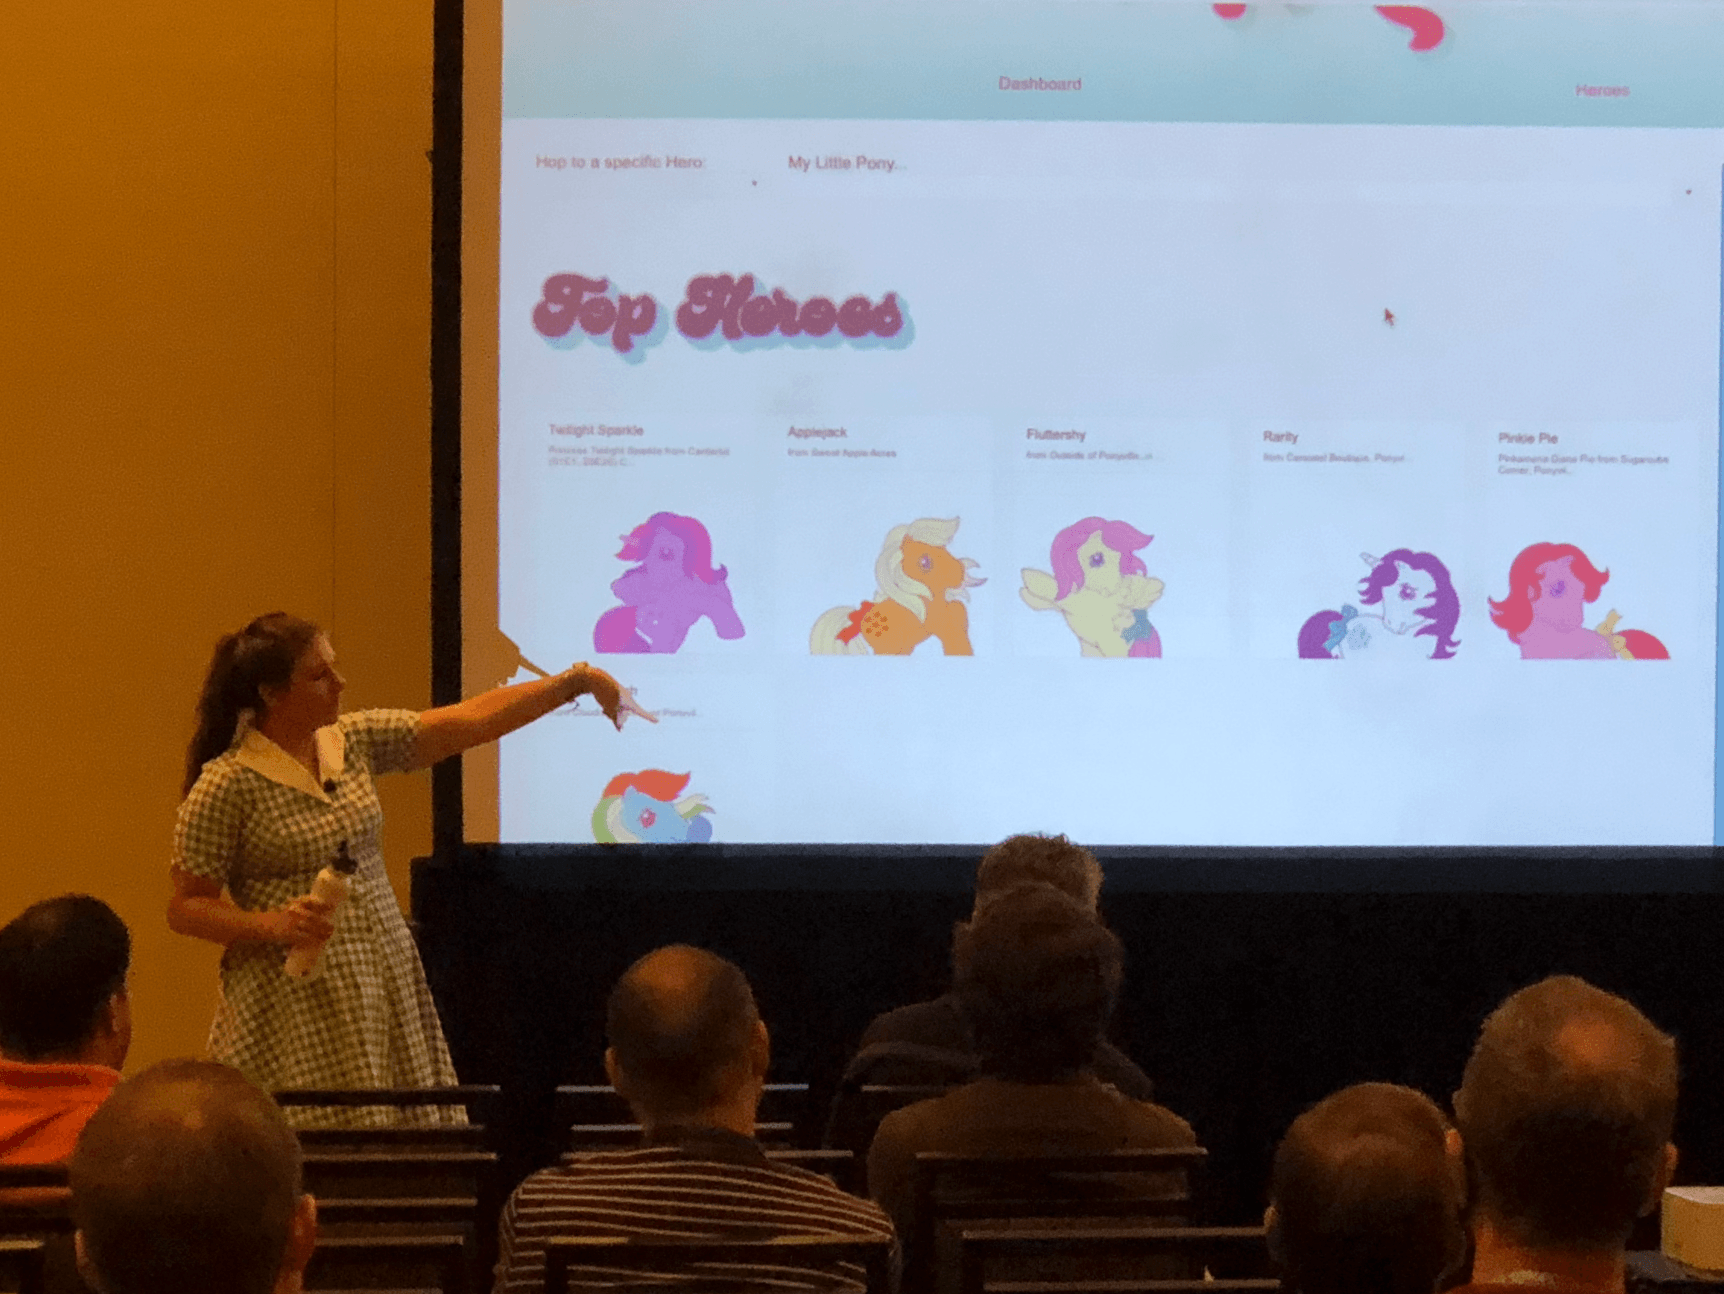 Alyssa Nicoll giving a talk in front of a My Little Pony slide